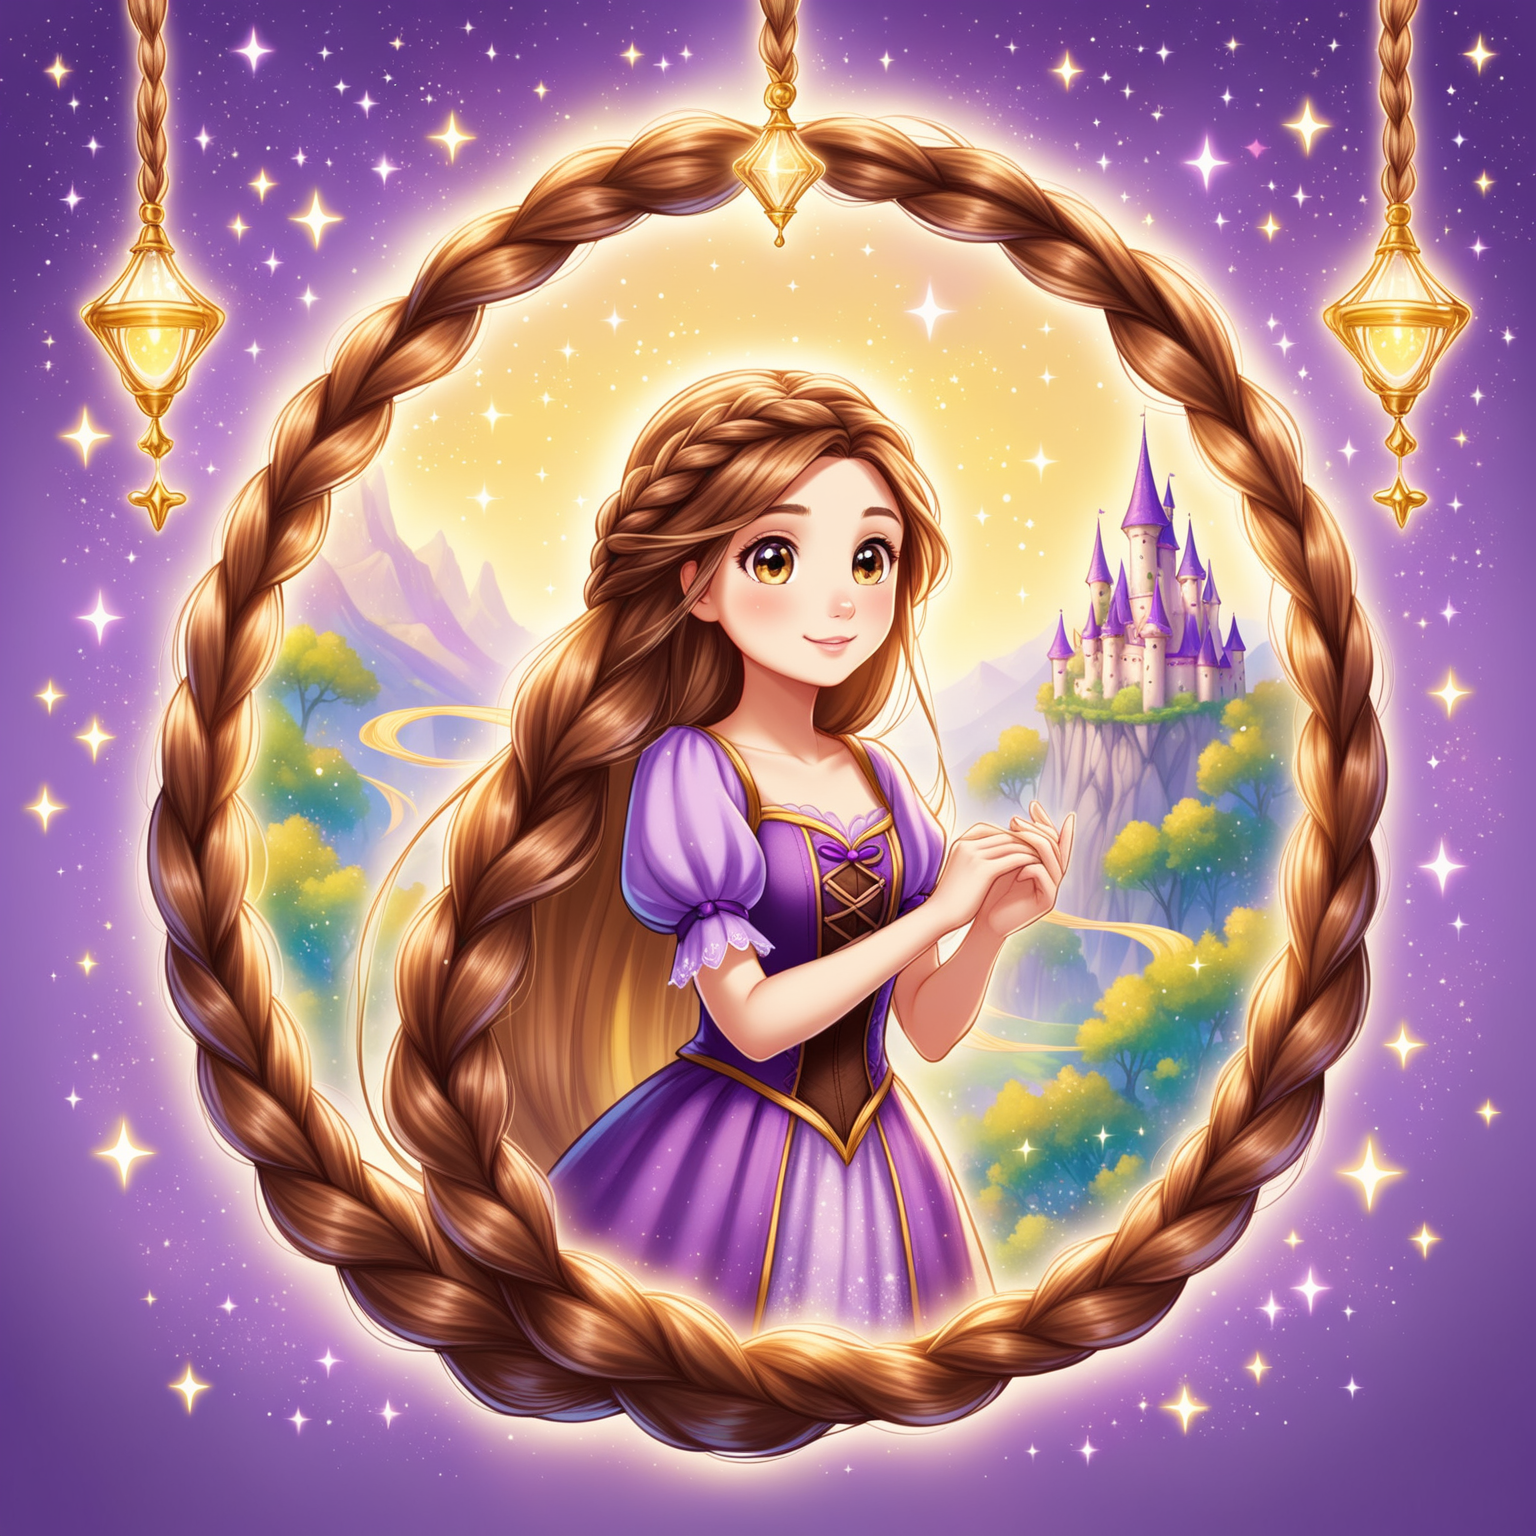 logo. rapunzel inspired. long braid of brown hair. brown eyes. background of  purple and yellow. magical and whimsical.